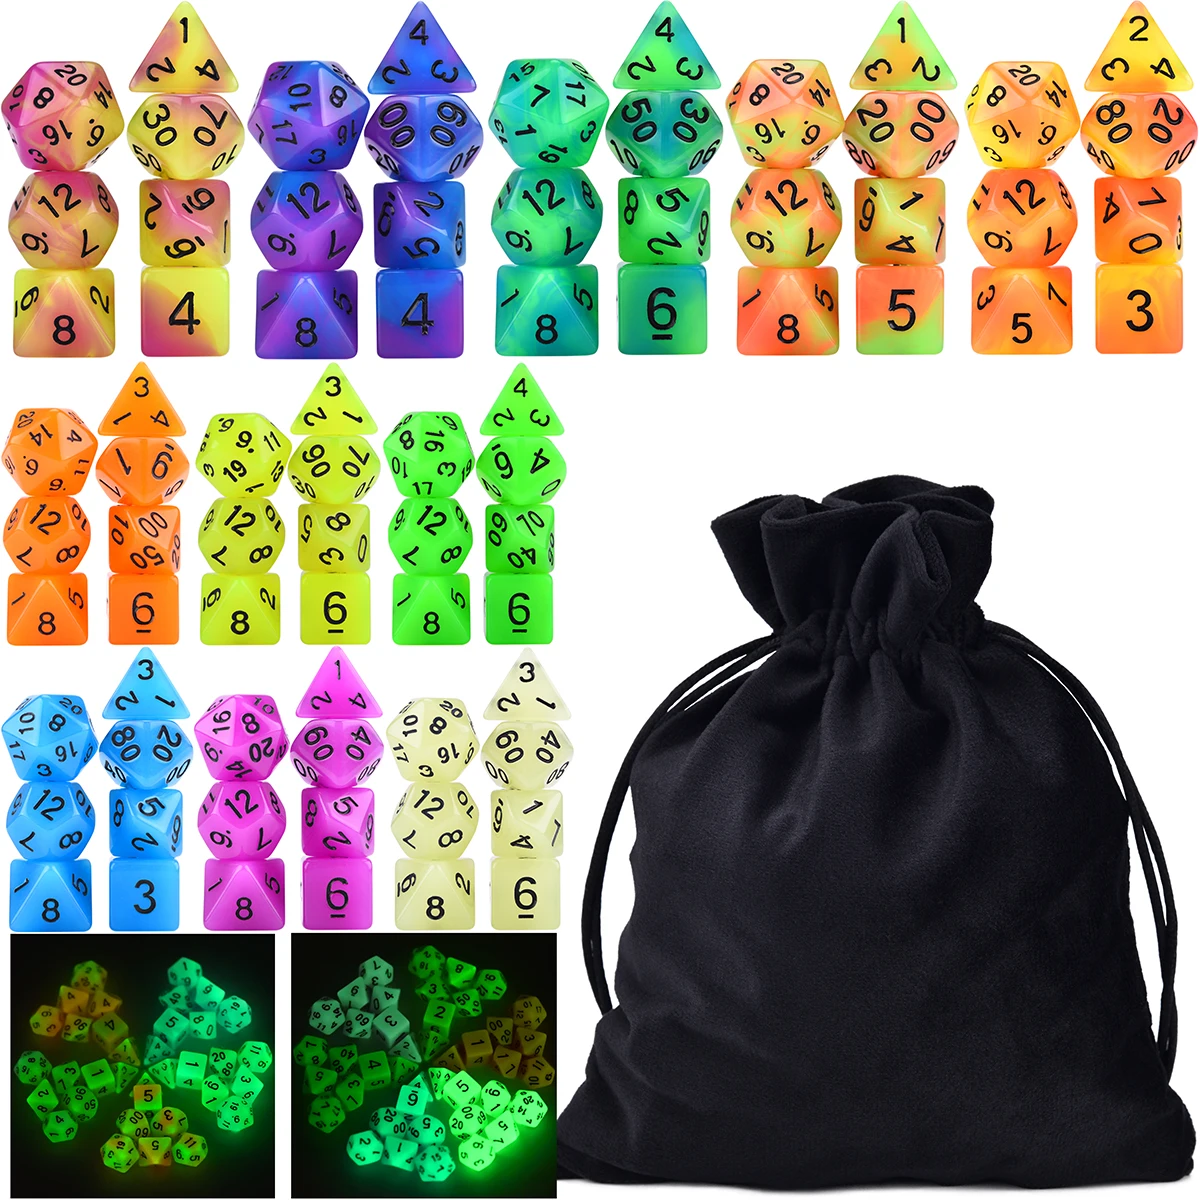 77PCS Glow in The Dark DND Polyhedral Dice Set for Tabletop Roleplaying Fantasy Games